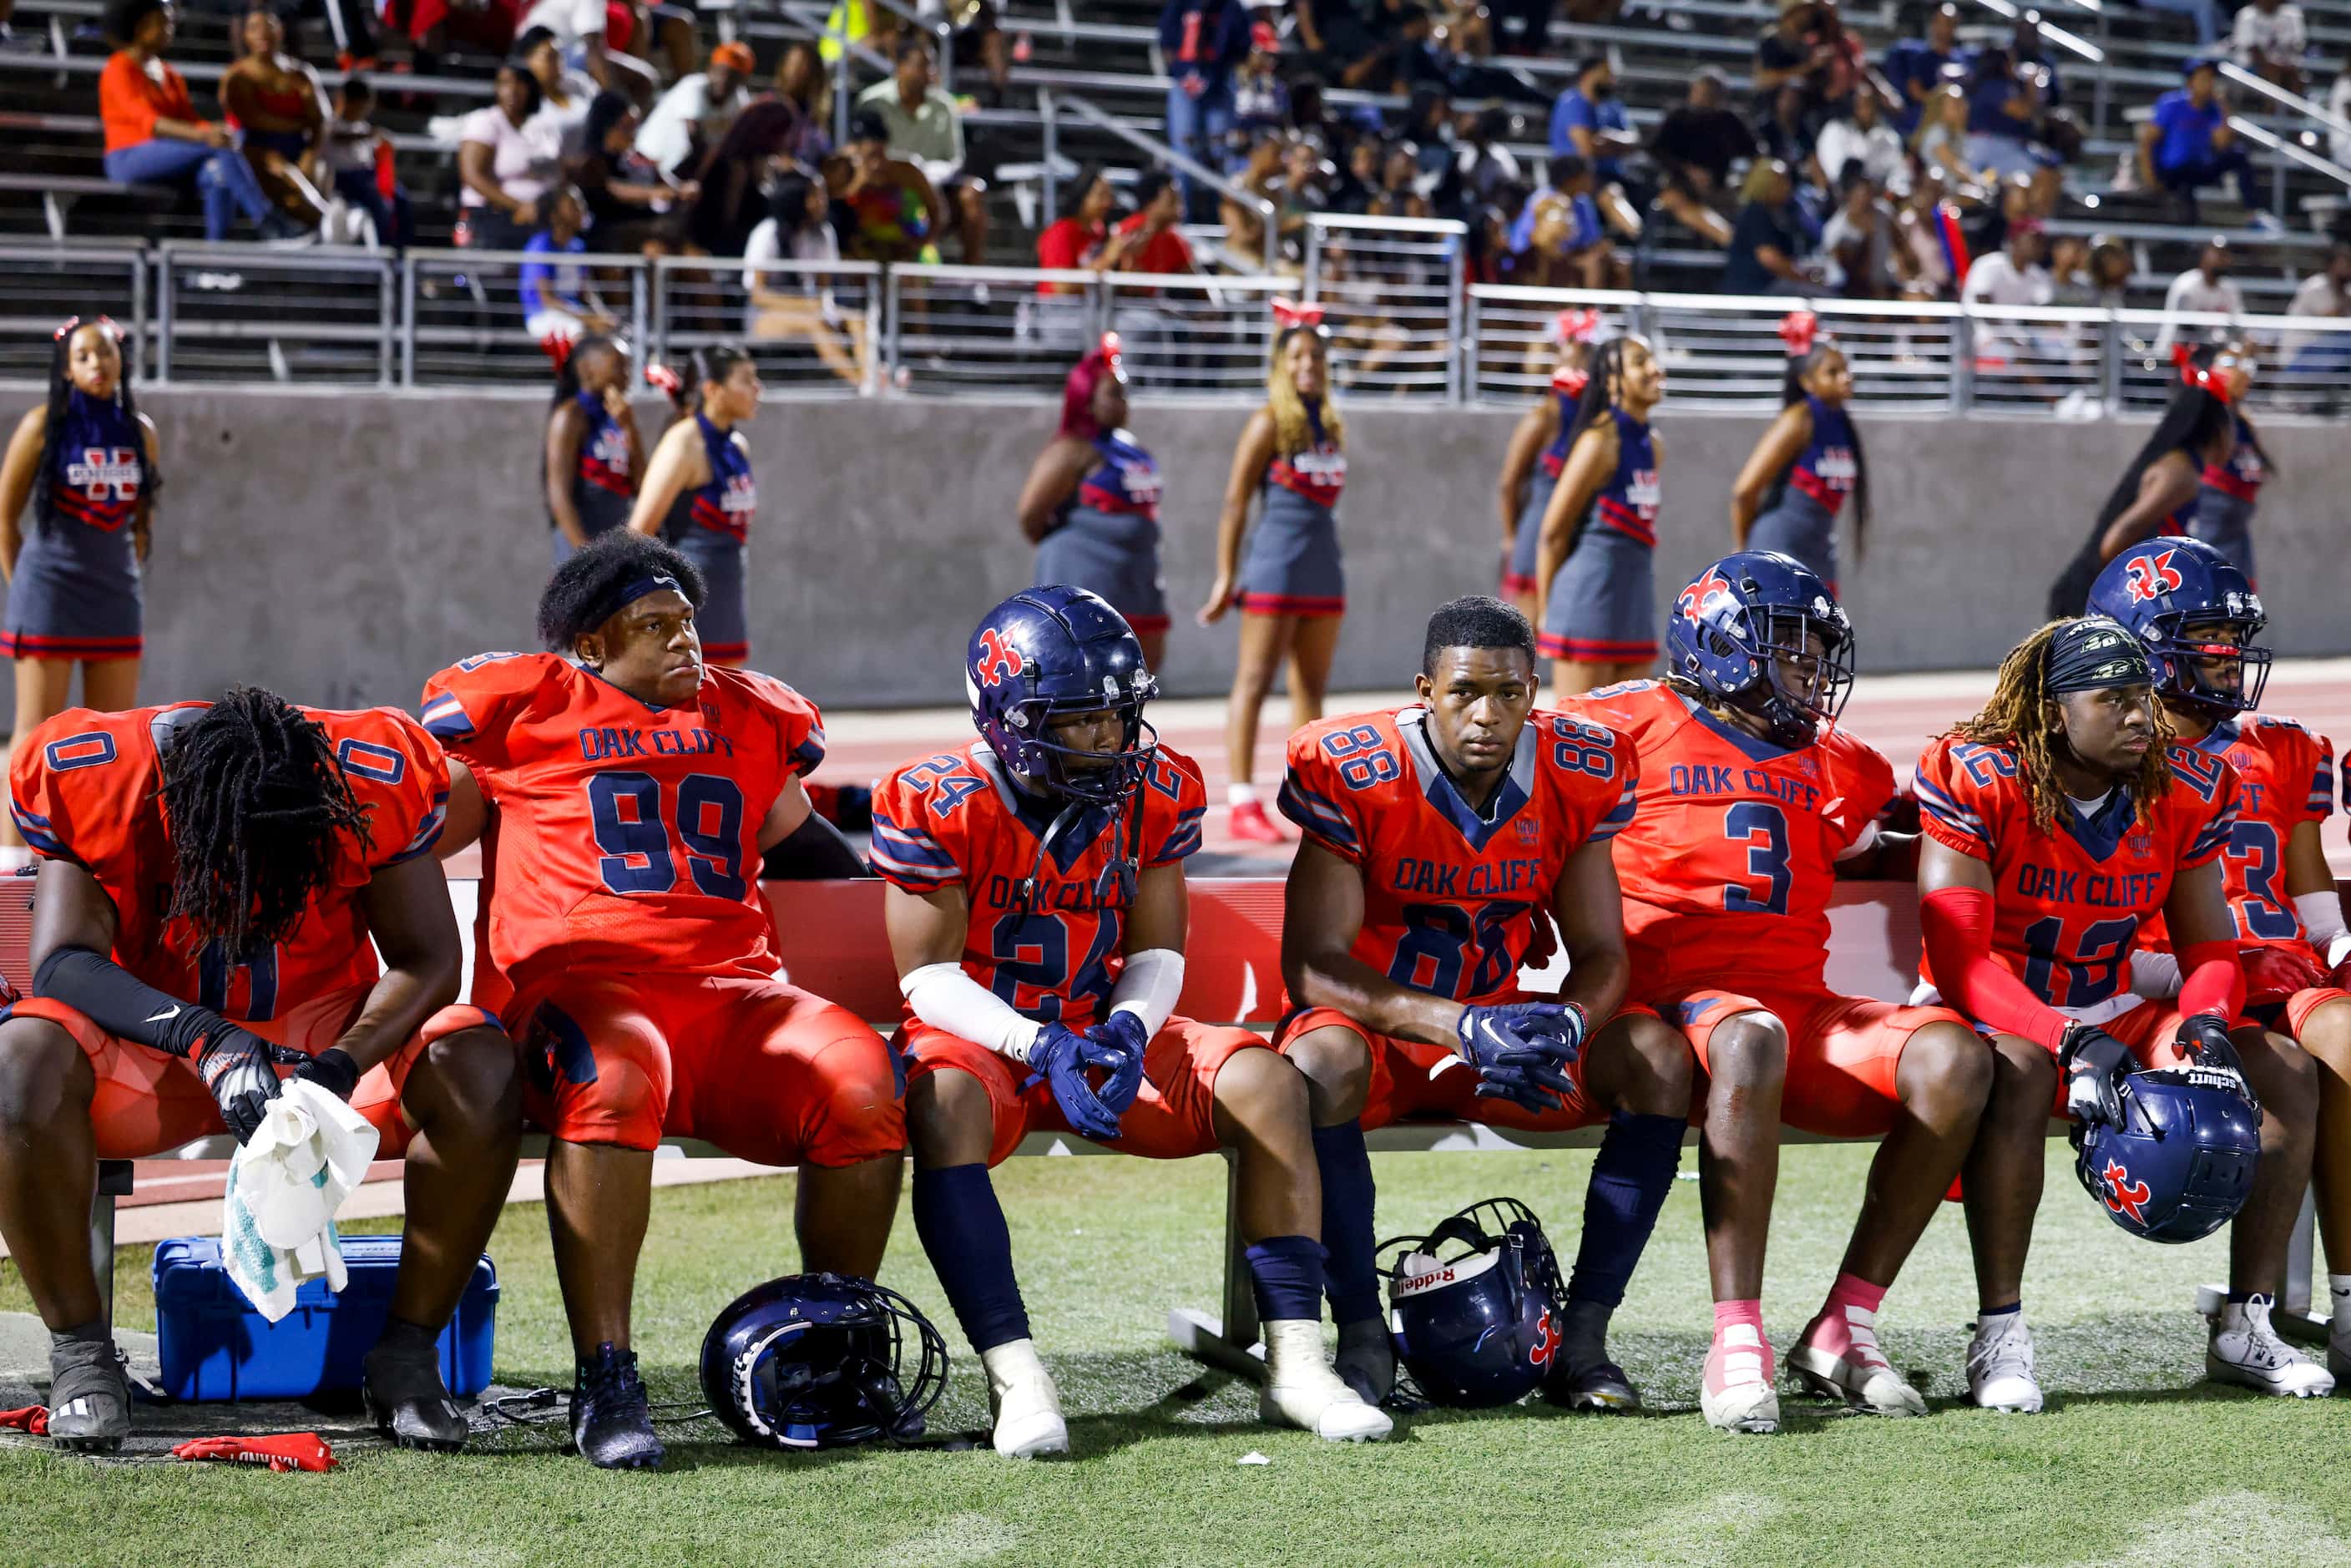 Kimball high players remain disappointed after falling behind against Carter high during the...